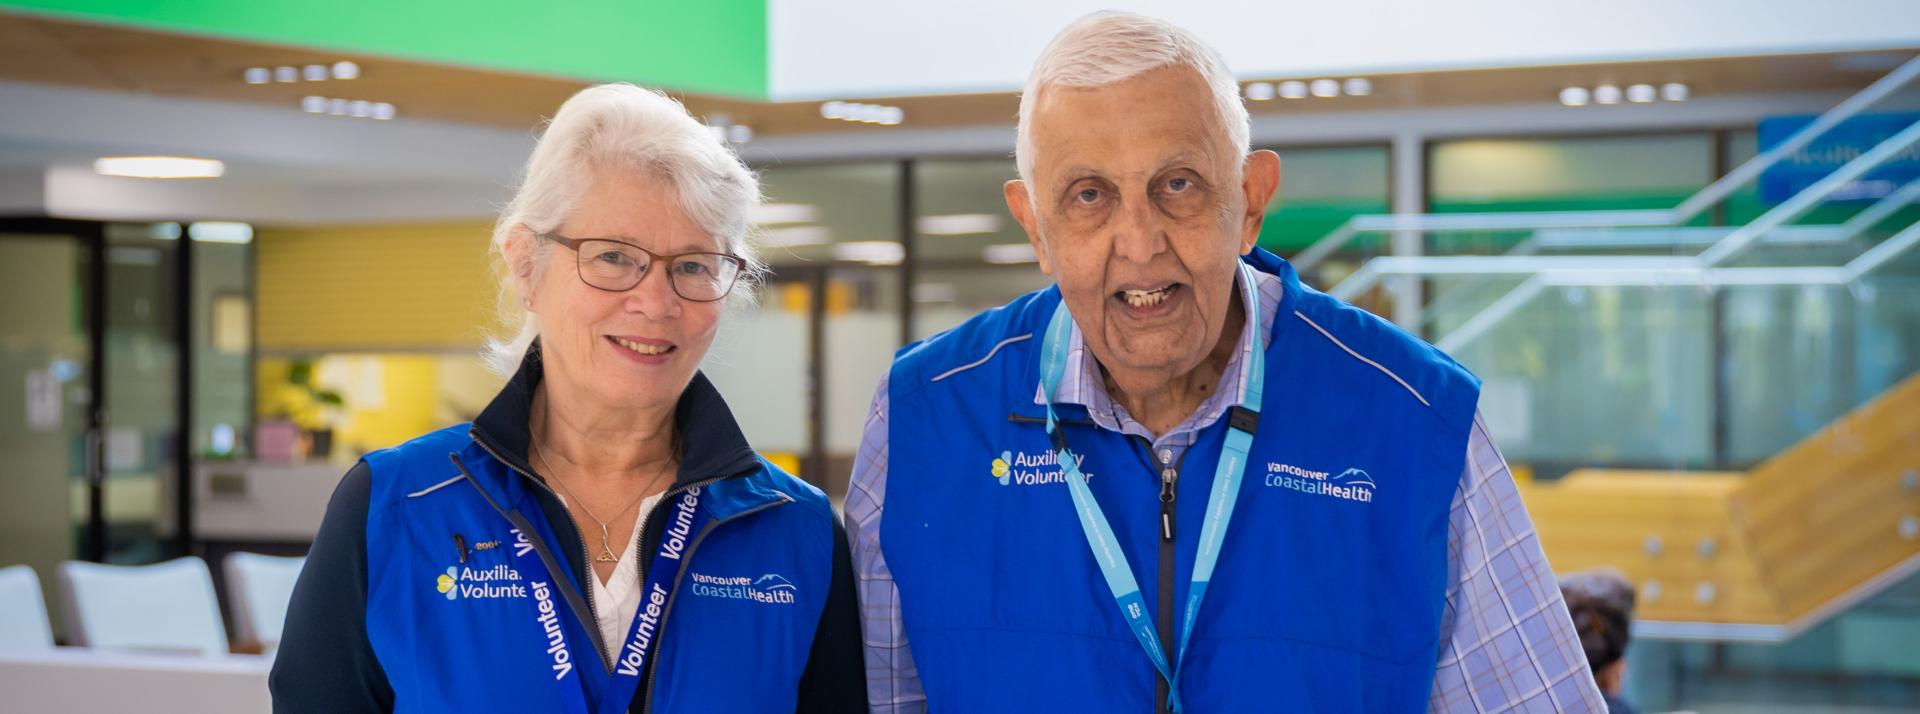 Two volunteers at Lions Gate Hospital 